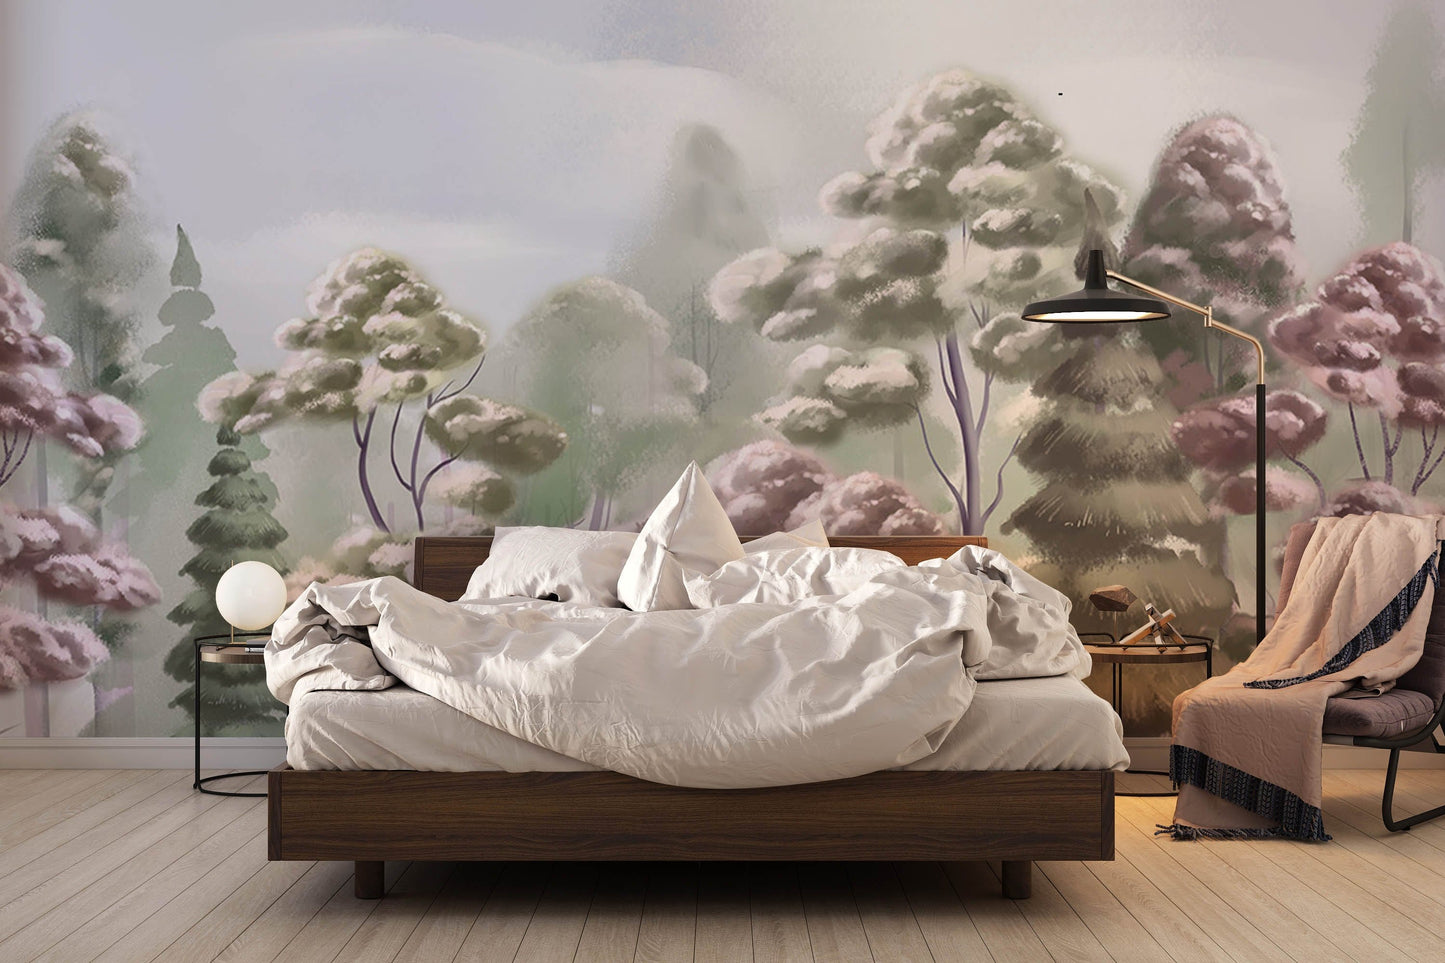 Wallpaper mural of a misty forest for use in decorating bedrooms